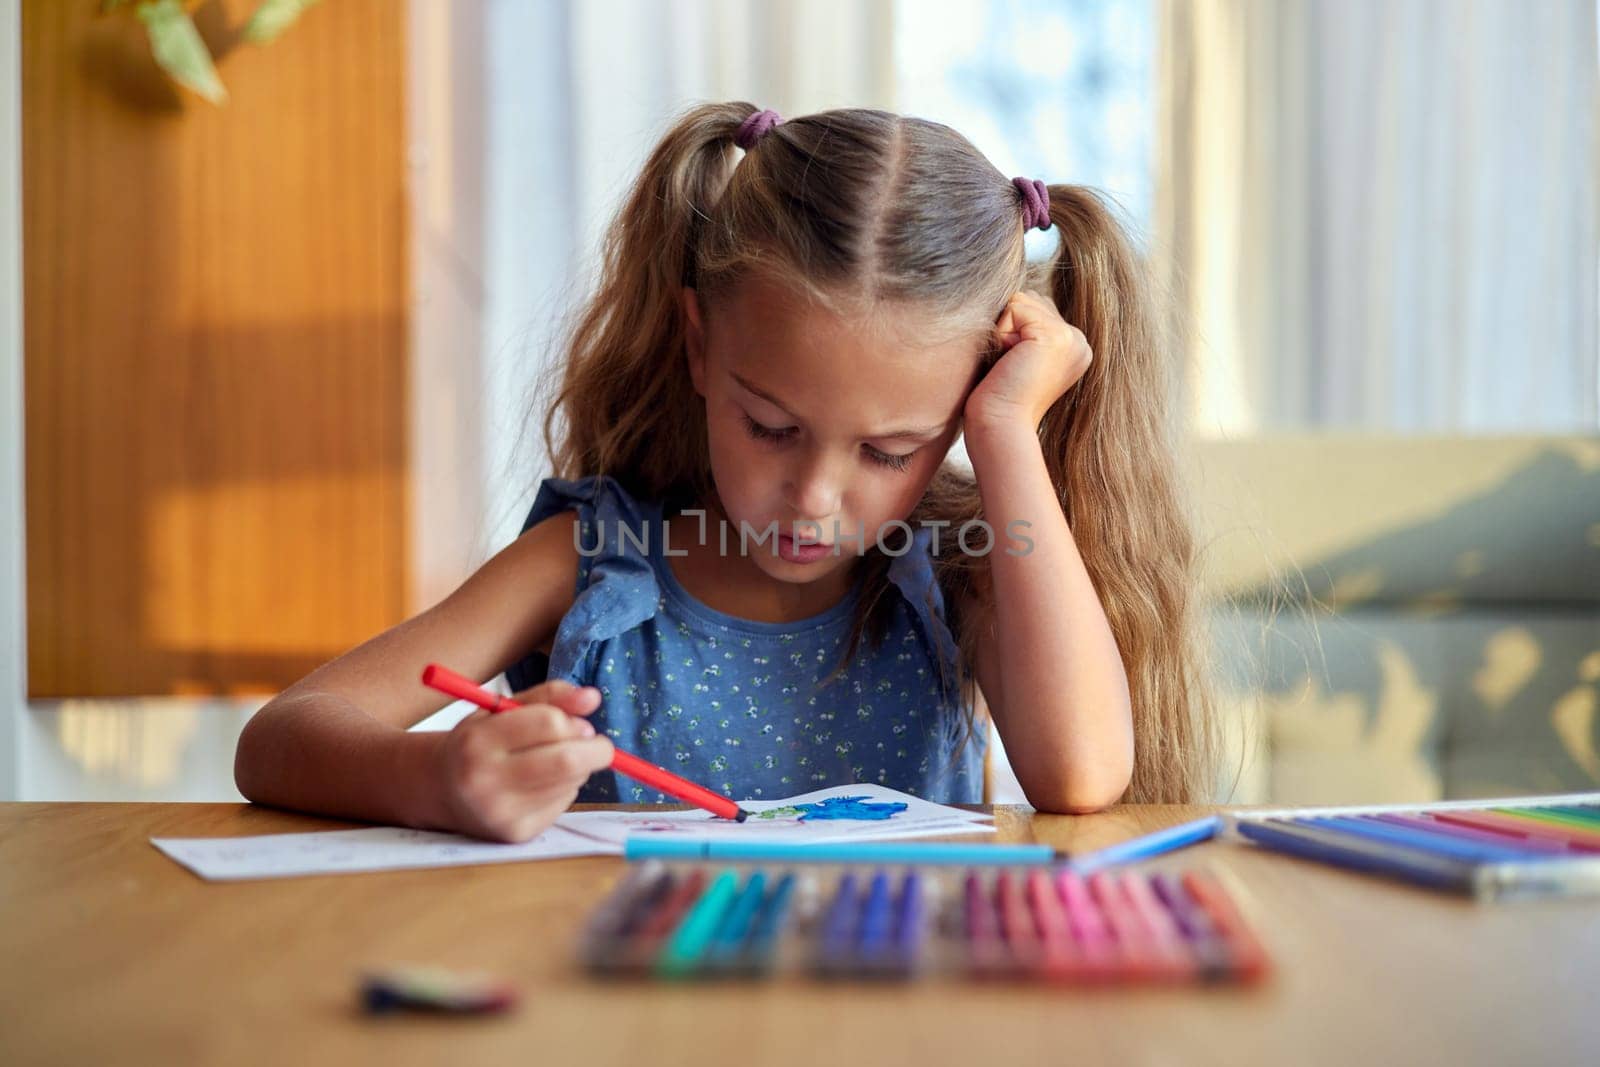 Concentrated girl painting with colorful pencils by Demkat